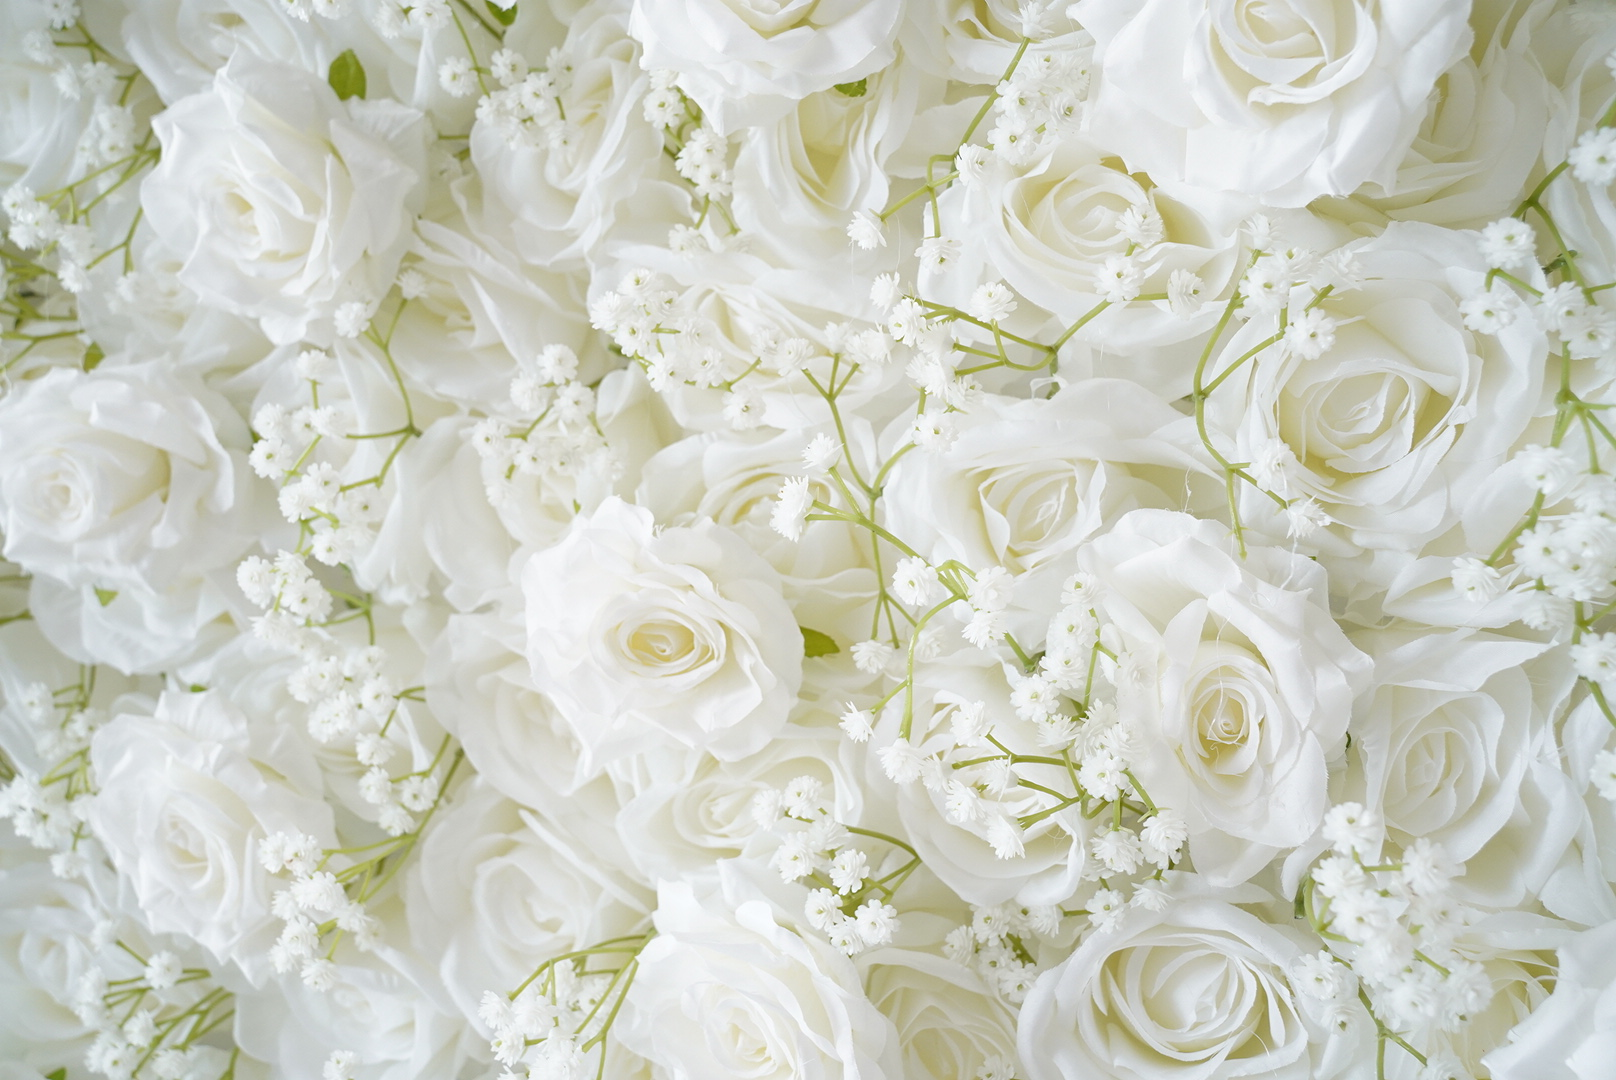 Baby breath pure white rose fabric flower wall looks pure and beautiful.